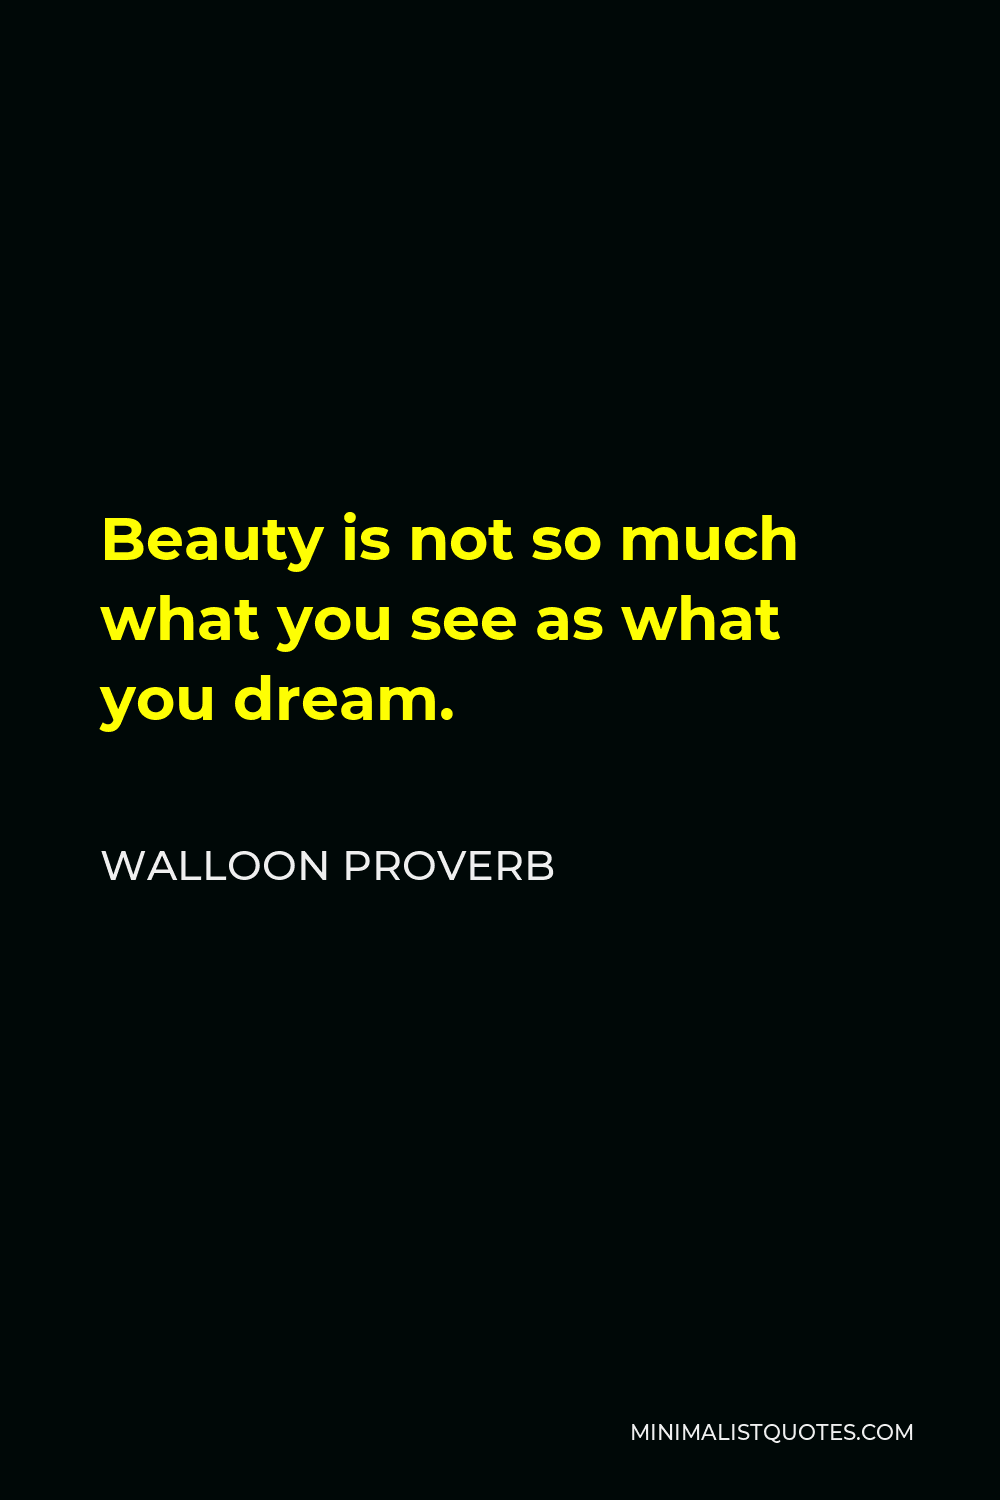 Walloon Proverb Quote - Beauty is not so much what you see as what you dream.